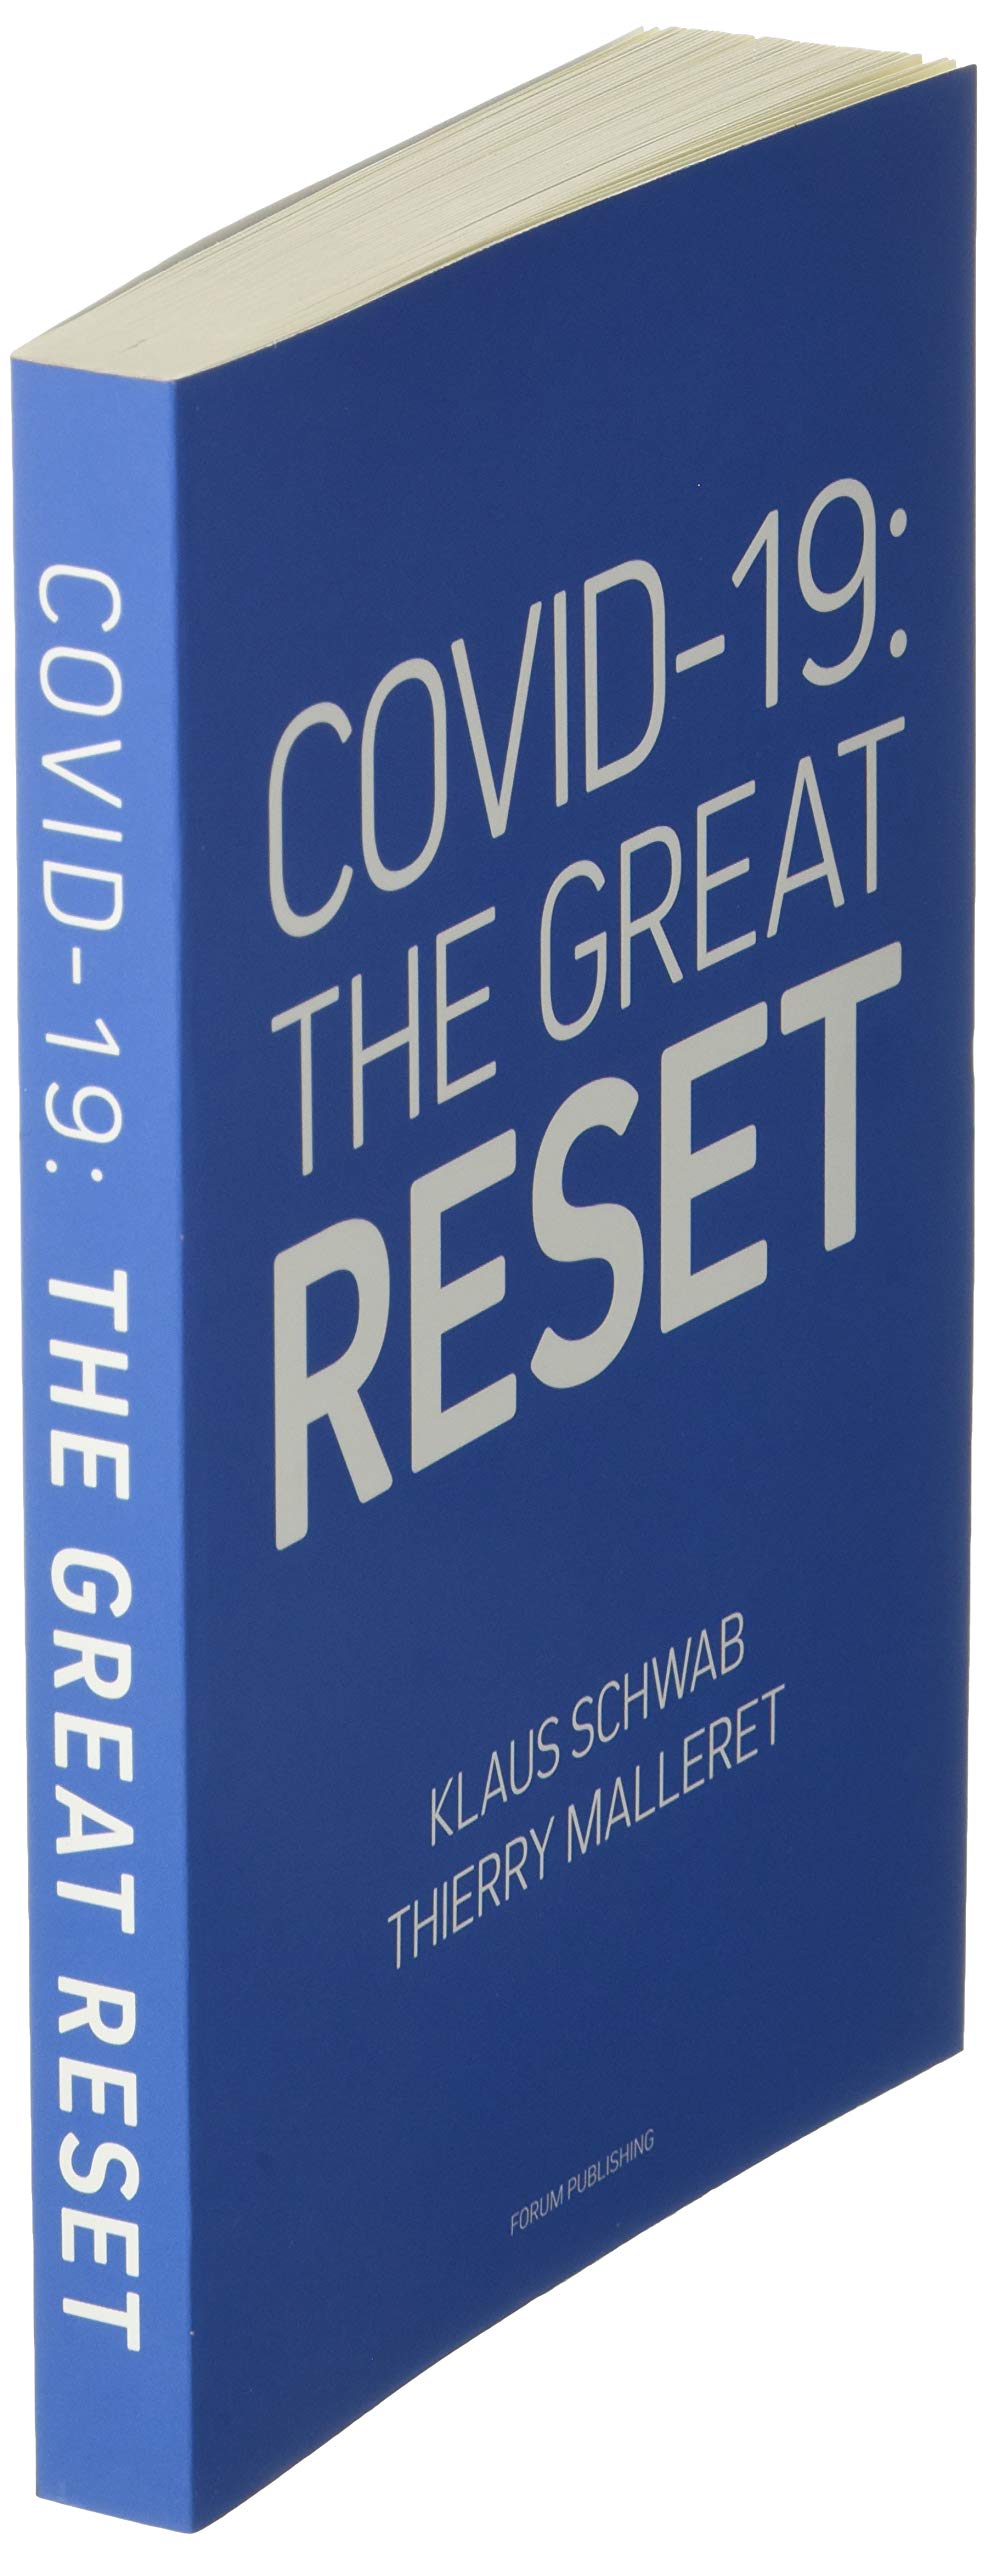 COVID-19: The Great Reset